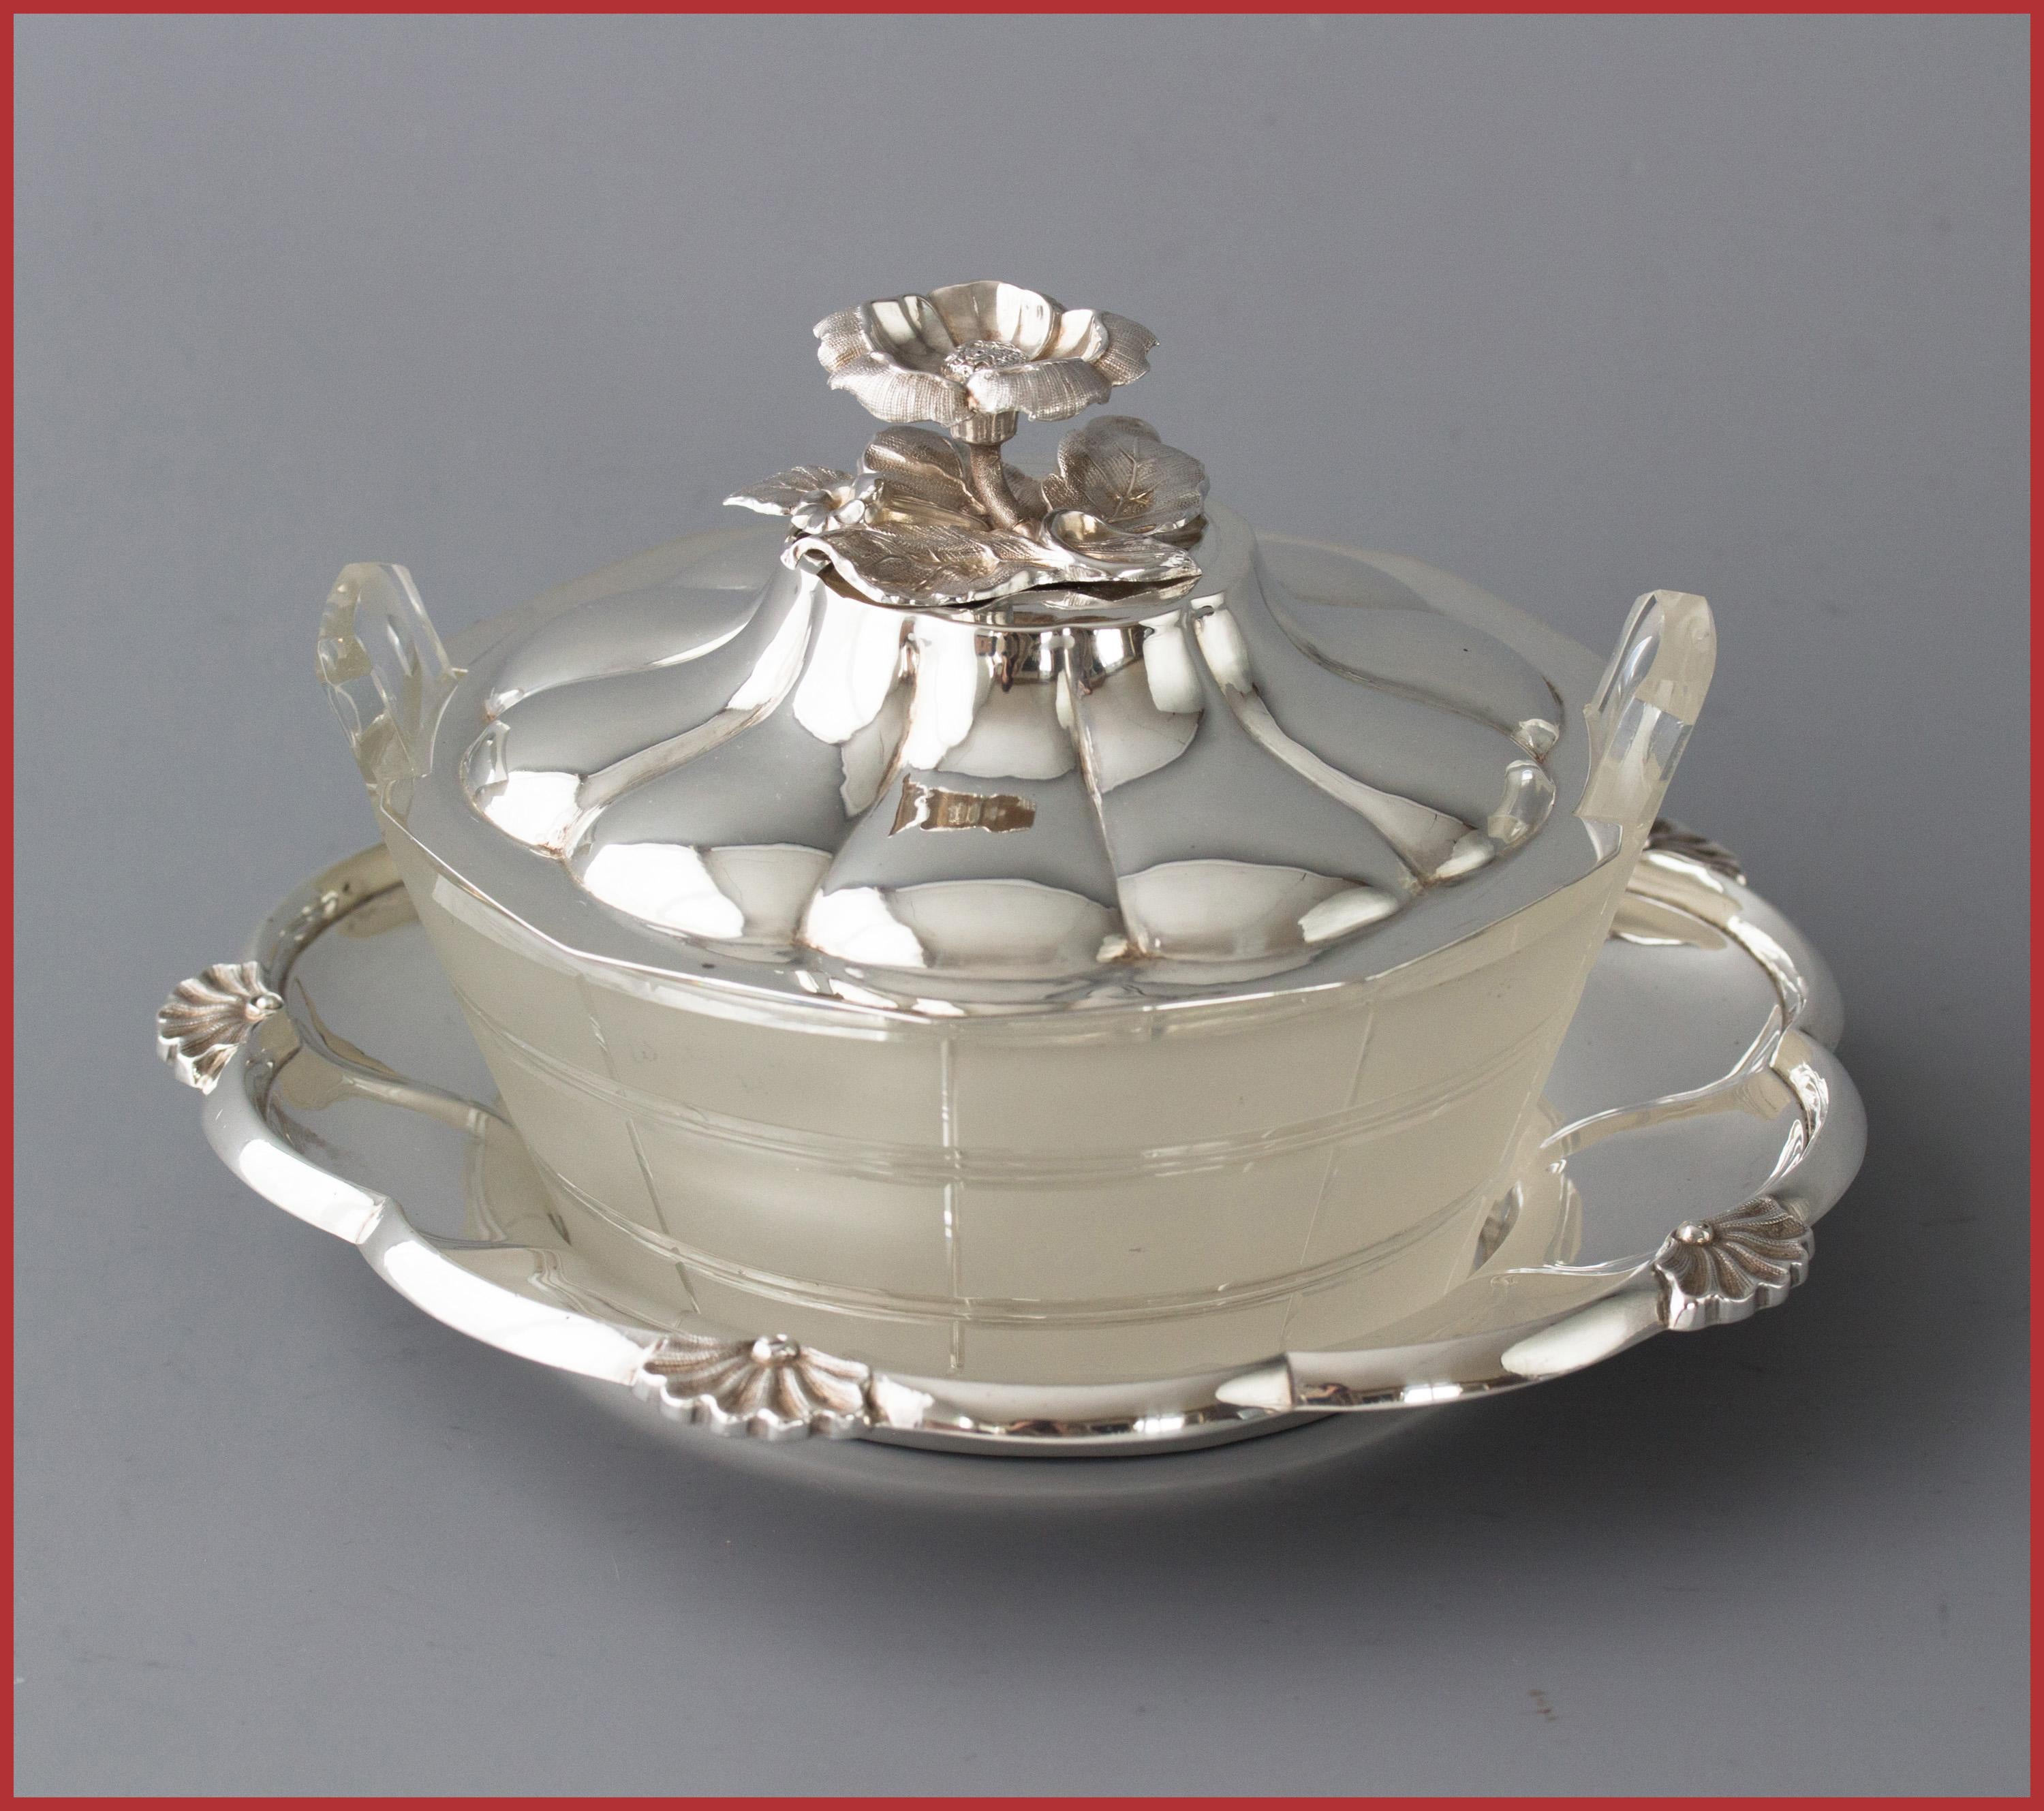 A very good quality circular silver butter dish with a cut glass receptacle in the shape of a churn. The base of the dish of petal form with shells to five of the lobes. The domed, fluted lid with a buttercup finial. 

All the parts are marked for